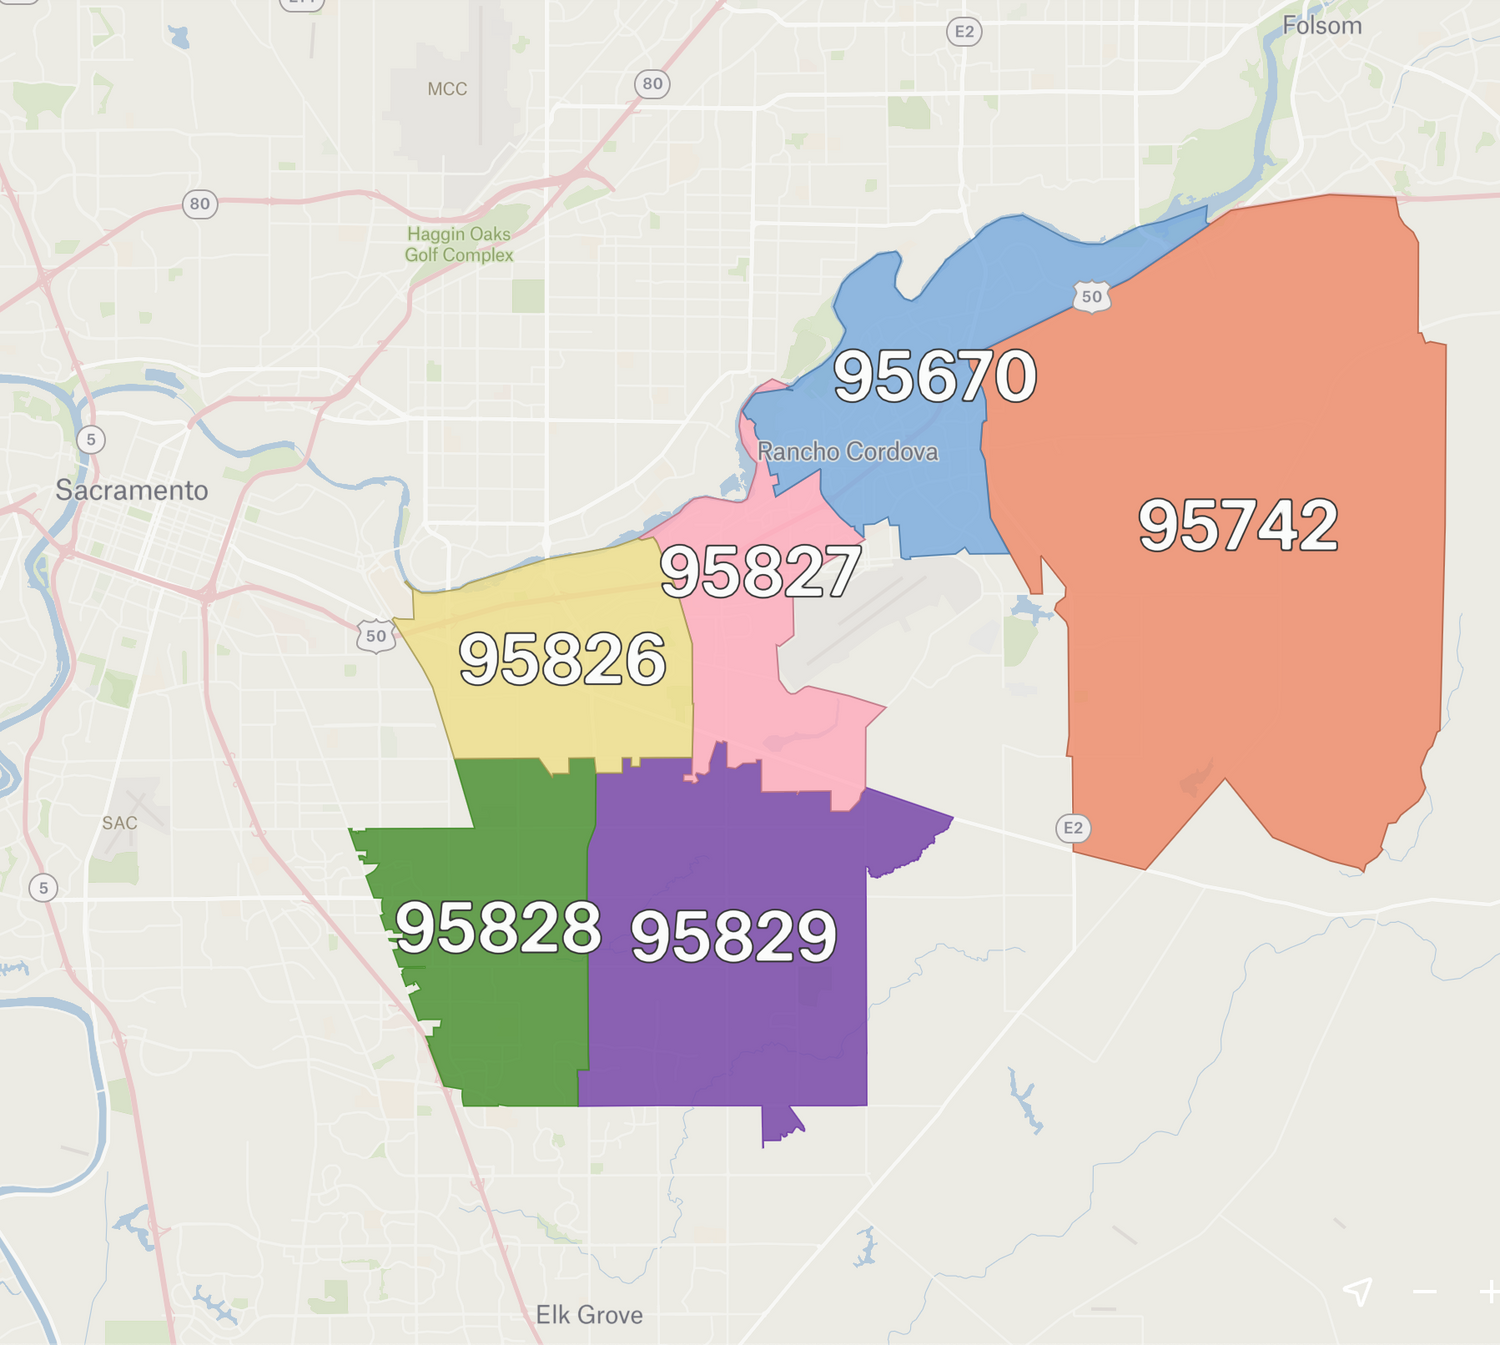 Map of Sacramento highlighting 6 different ZIP codes in different colors.